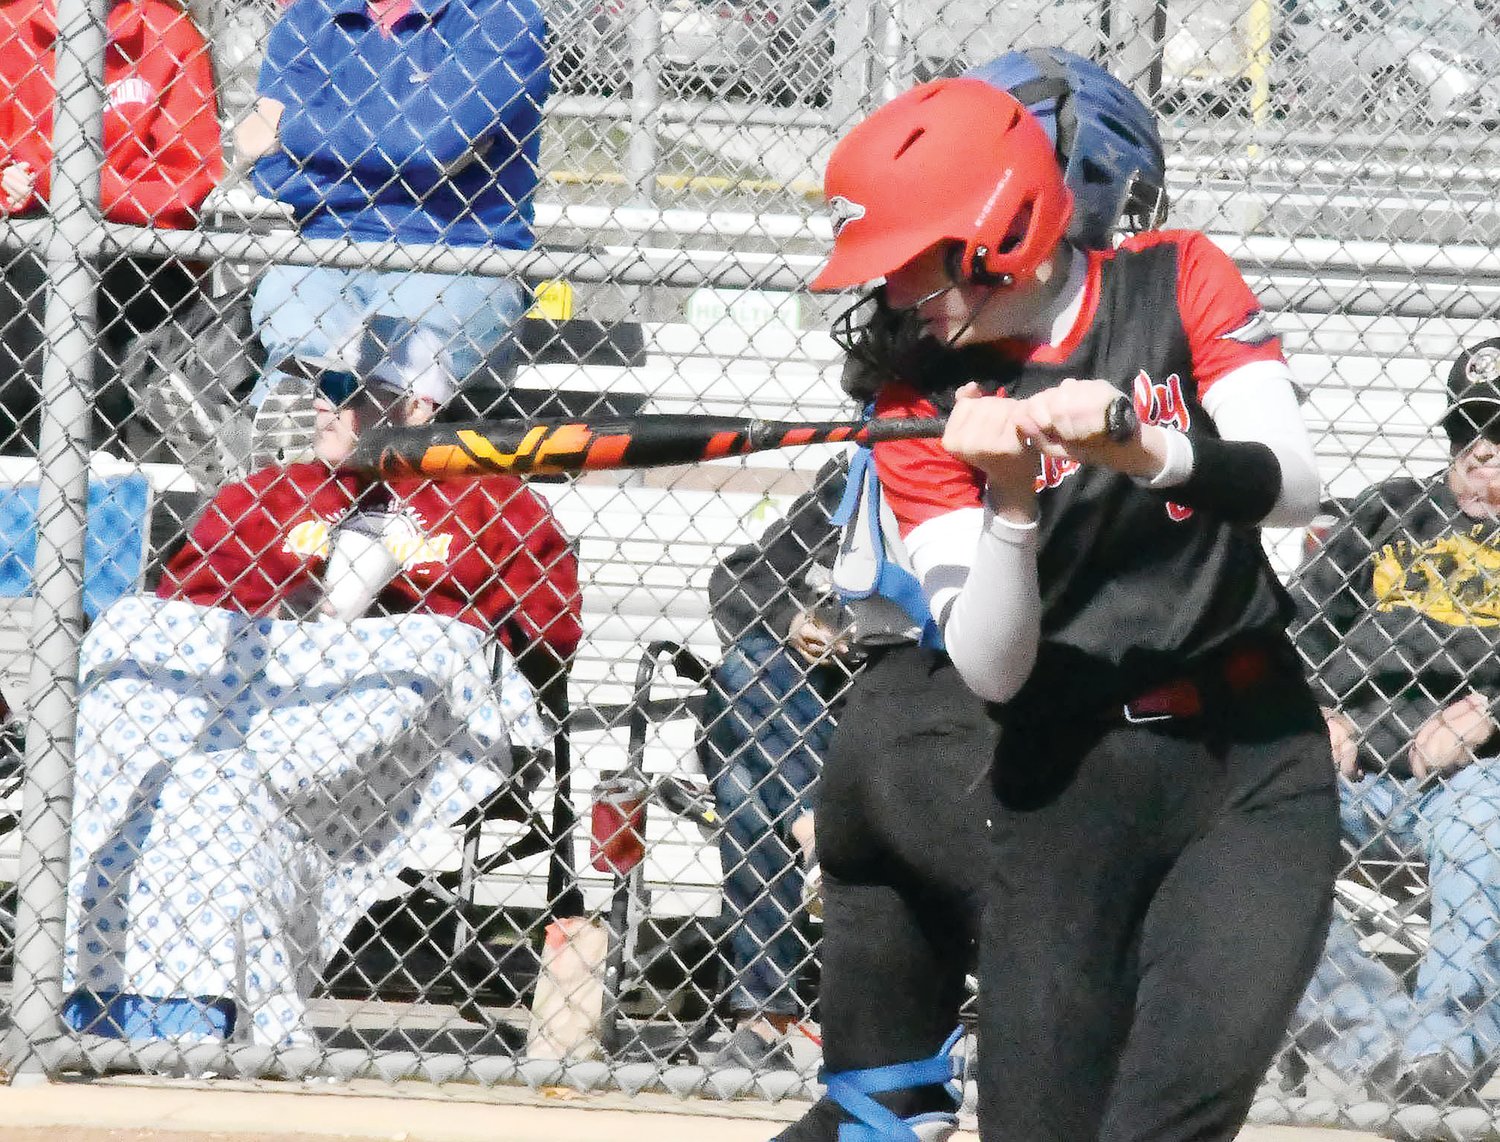 Mackenzie Roofener takes practice cuts before returning to the batter's box during her plate appearance.